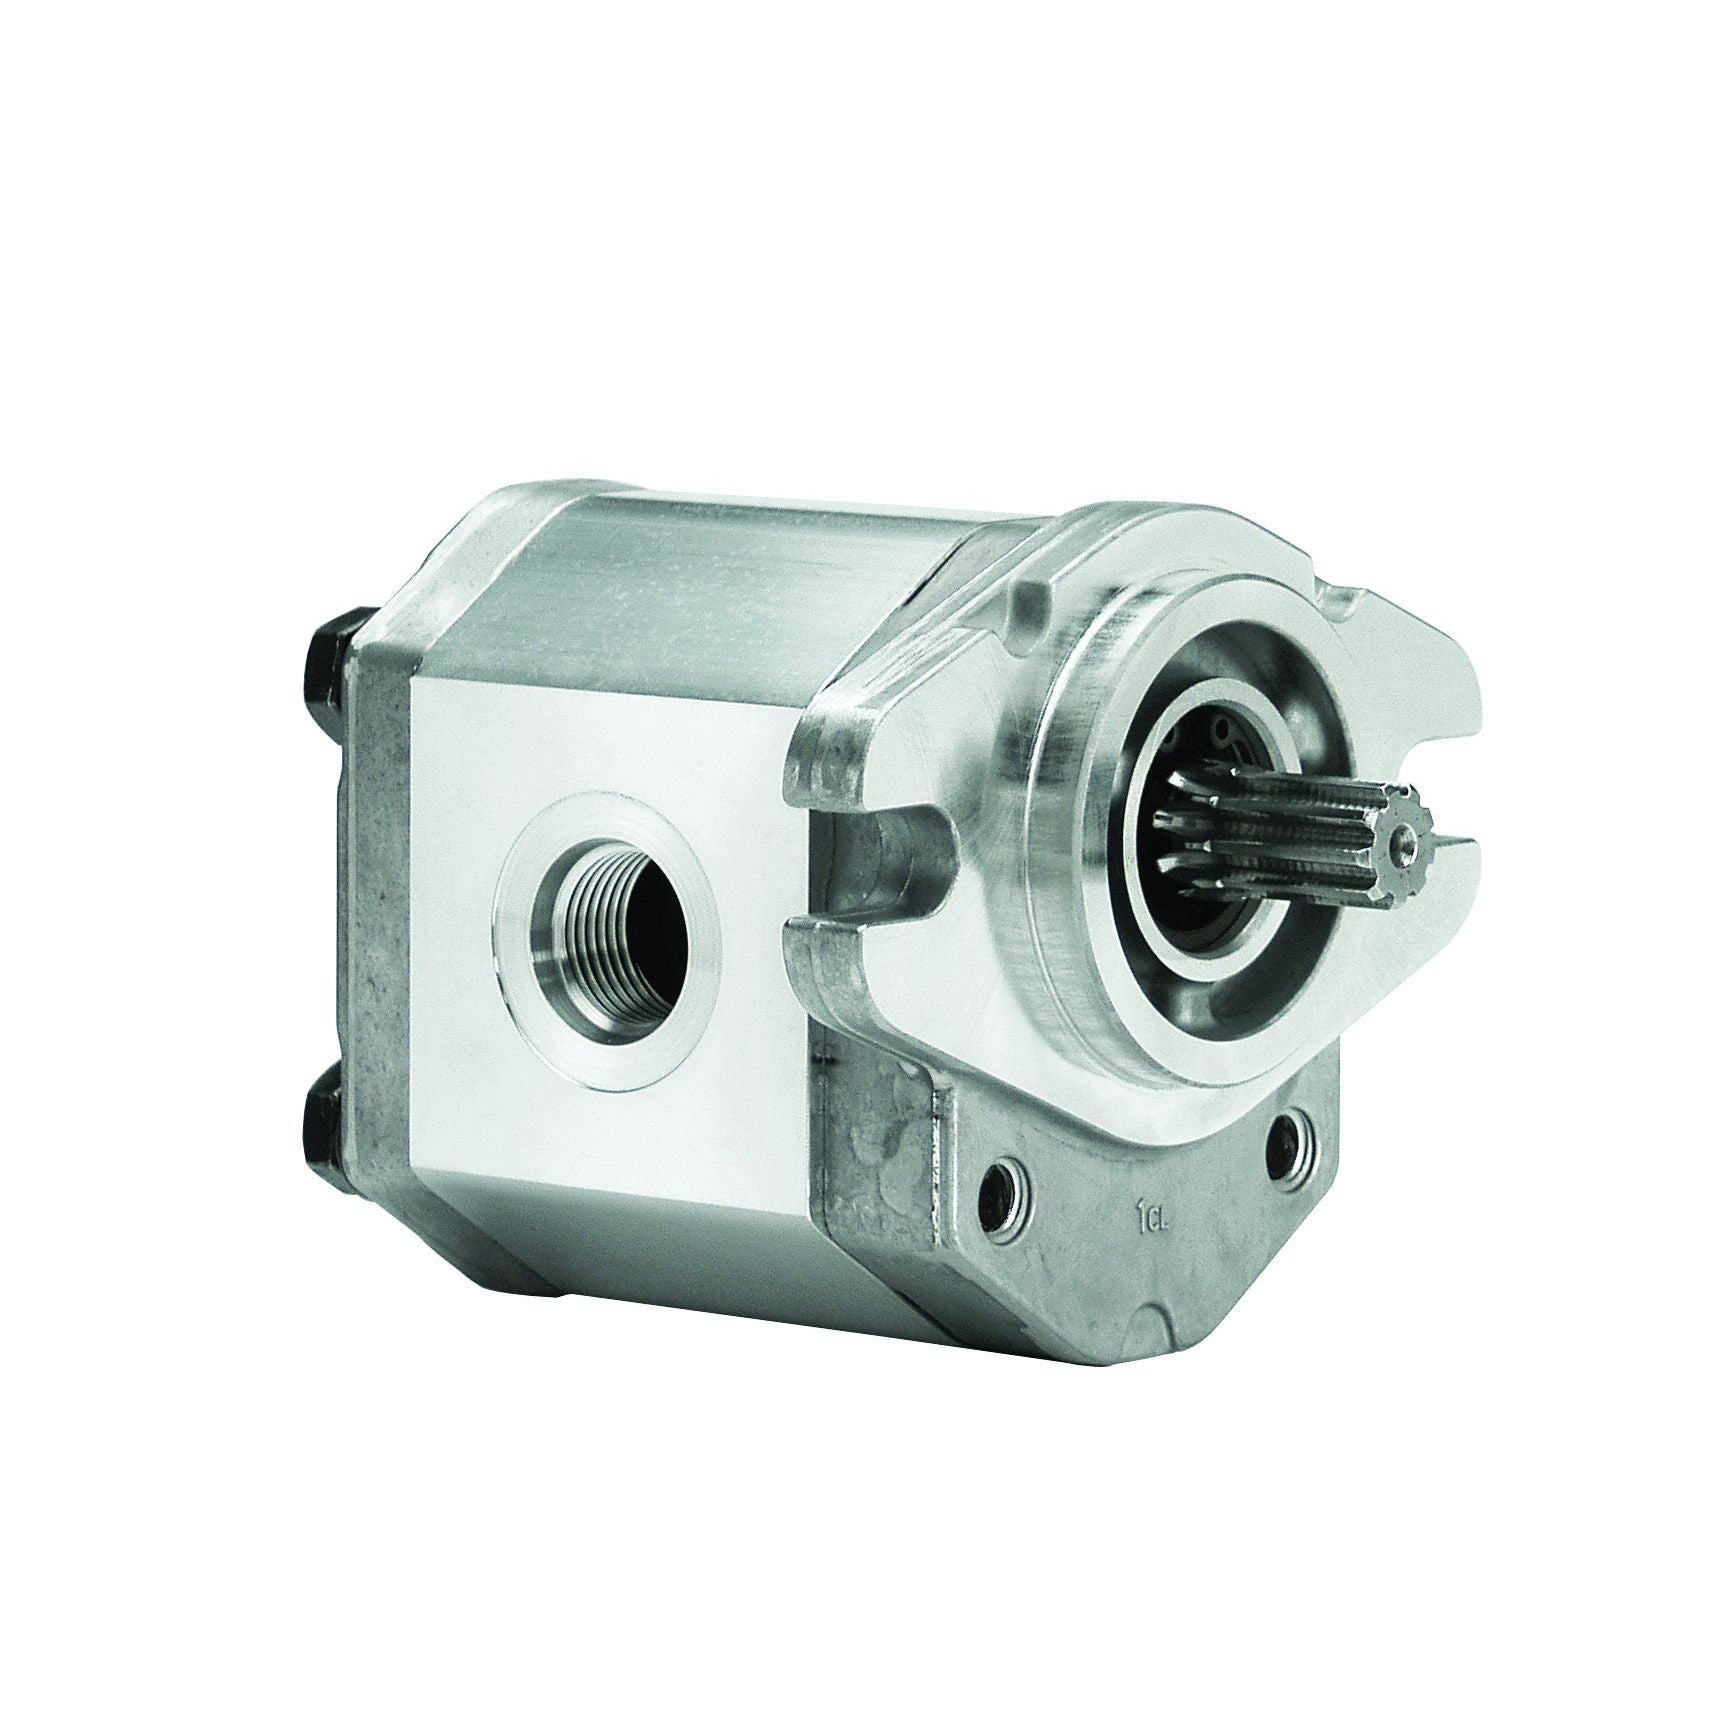 ALP2A-D-13-S1 : Marzocchi Gear Pump, CW, 9.6cc (0.5856in3), 4.56 GPM, 3625psi, 4000 RPM, #12 SAE (3/4") In, #10 SAE (5/8") Out, Splined Shaft 9T 16/32DP, SAE A 2-Bolt Mount